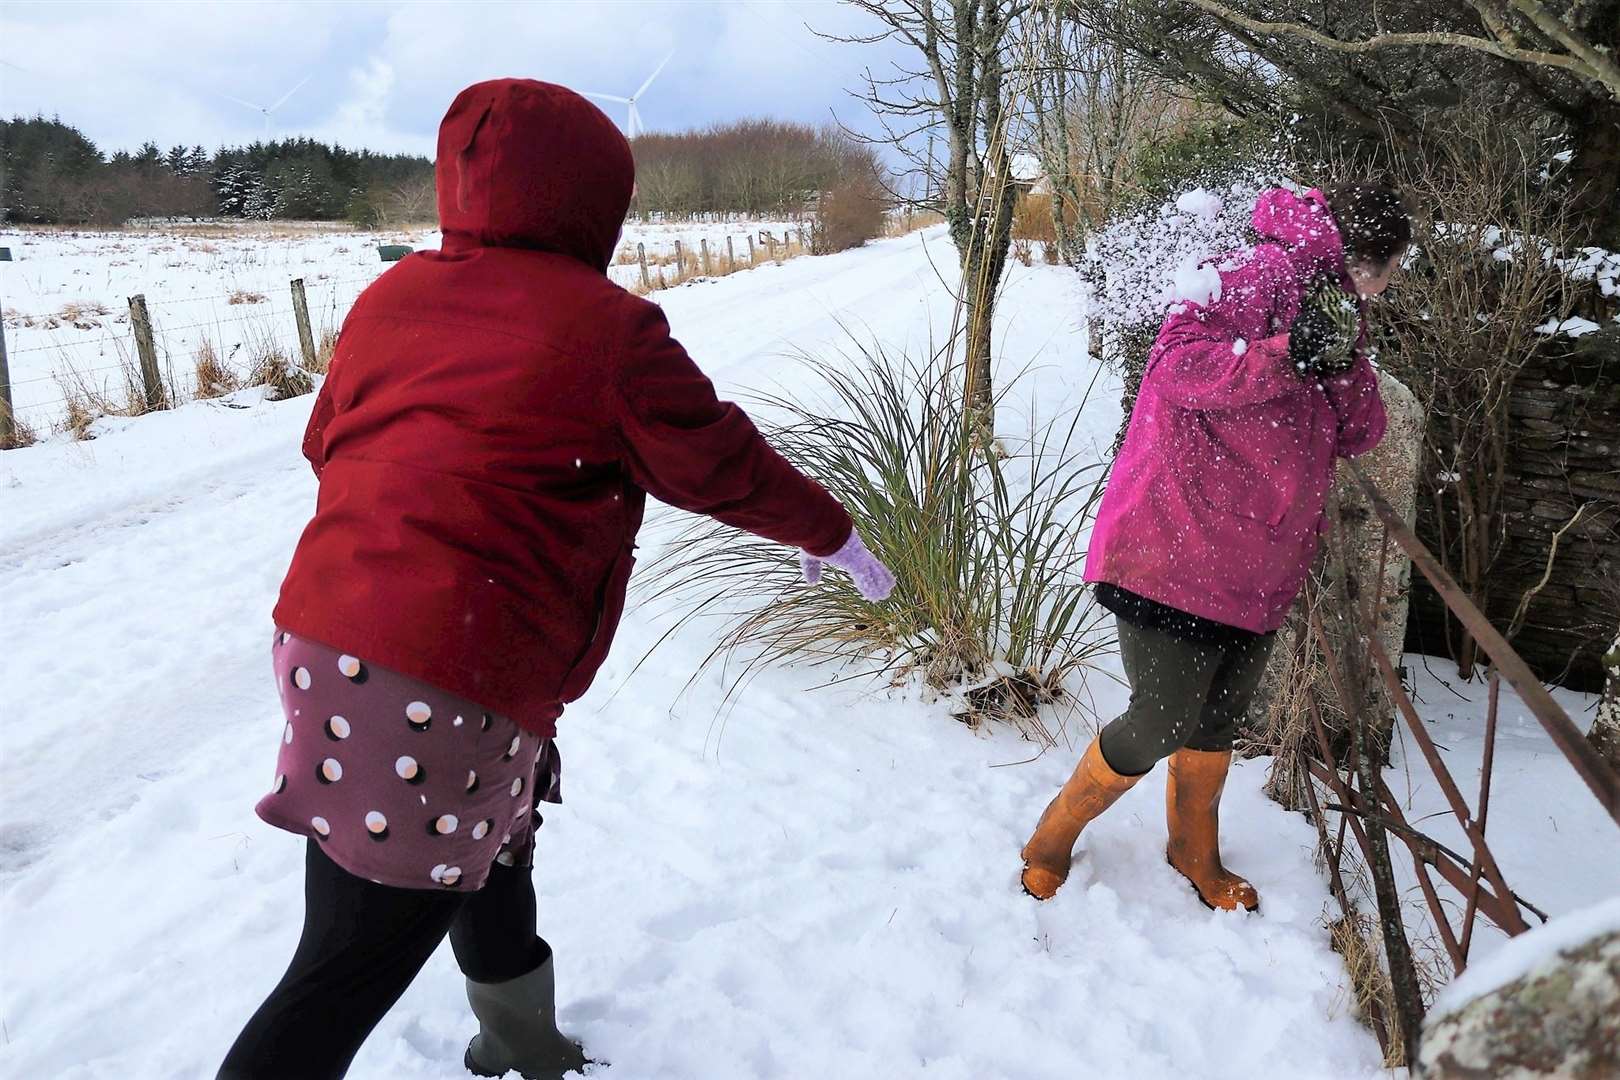 Two local primary school teachers enjoy the day off with a snowball fight. Picture: Virginia Crow